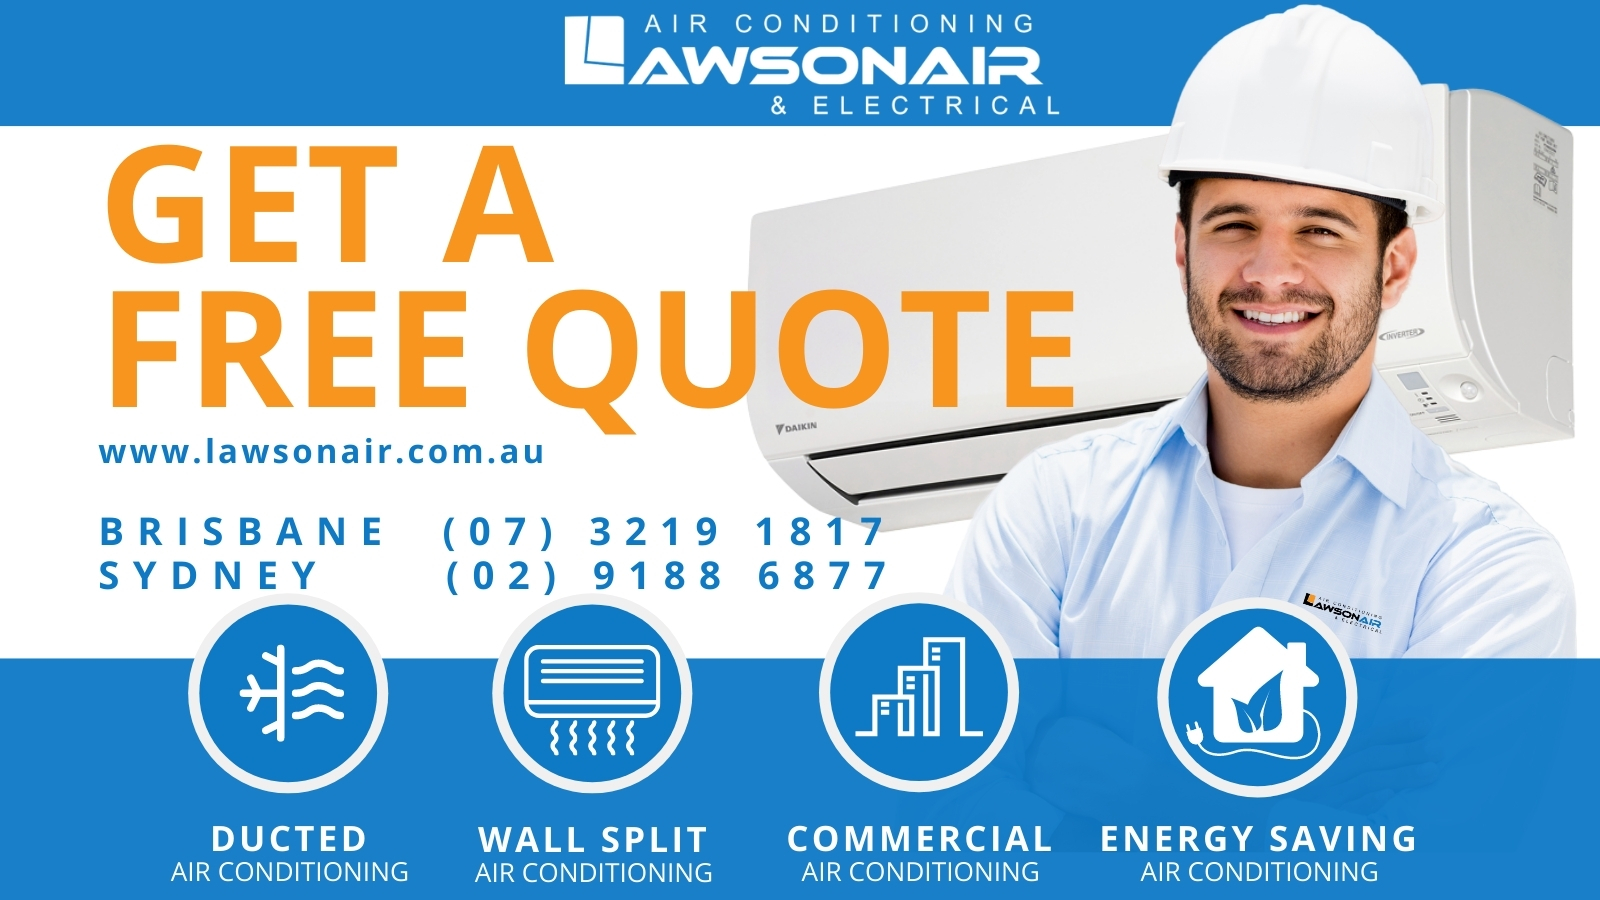 Air Conditioning Installer in Brisbane and Sydney. Split, Multi Split, Ducted Systems